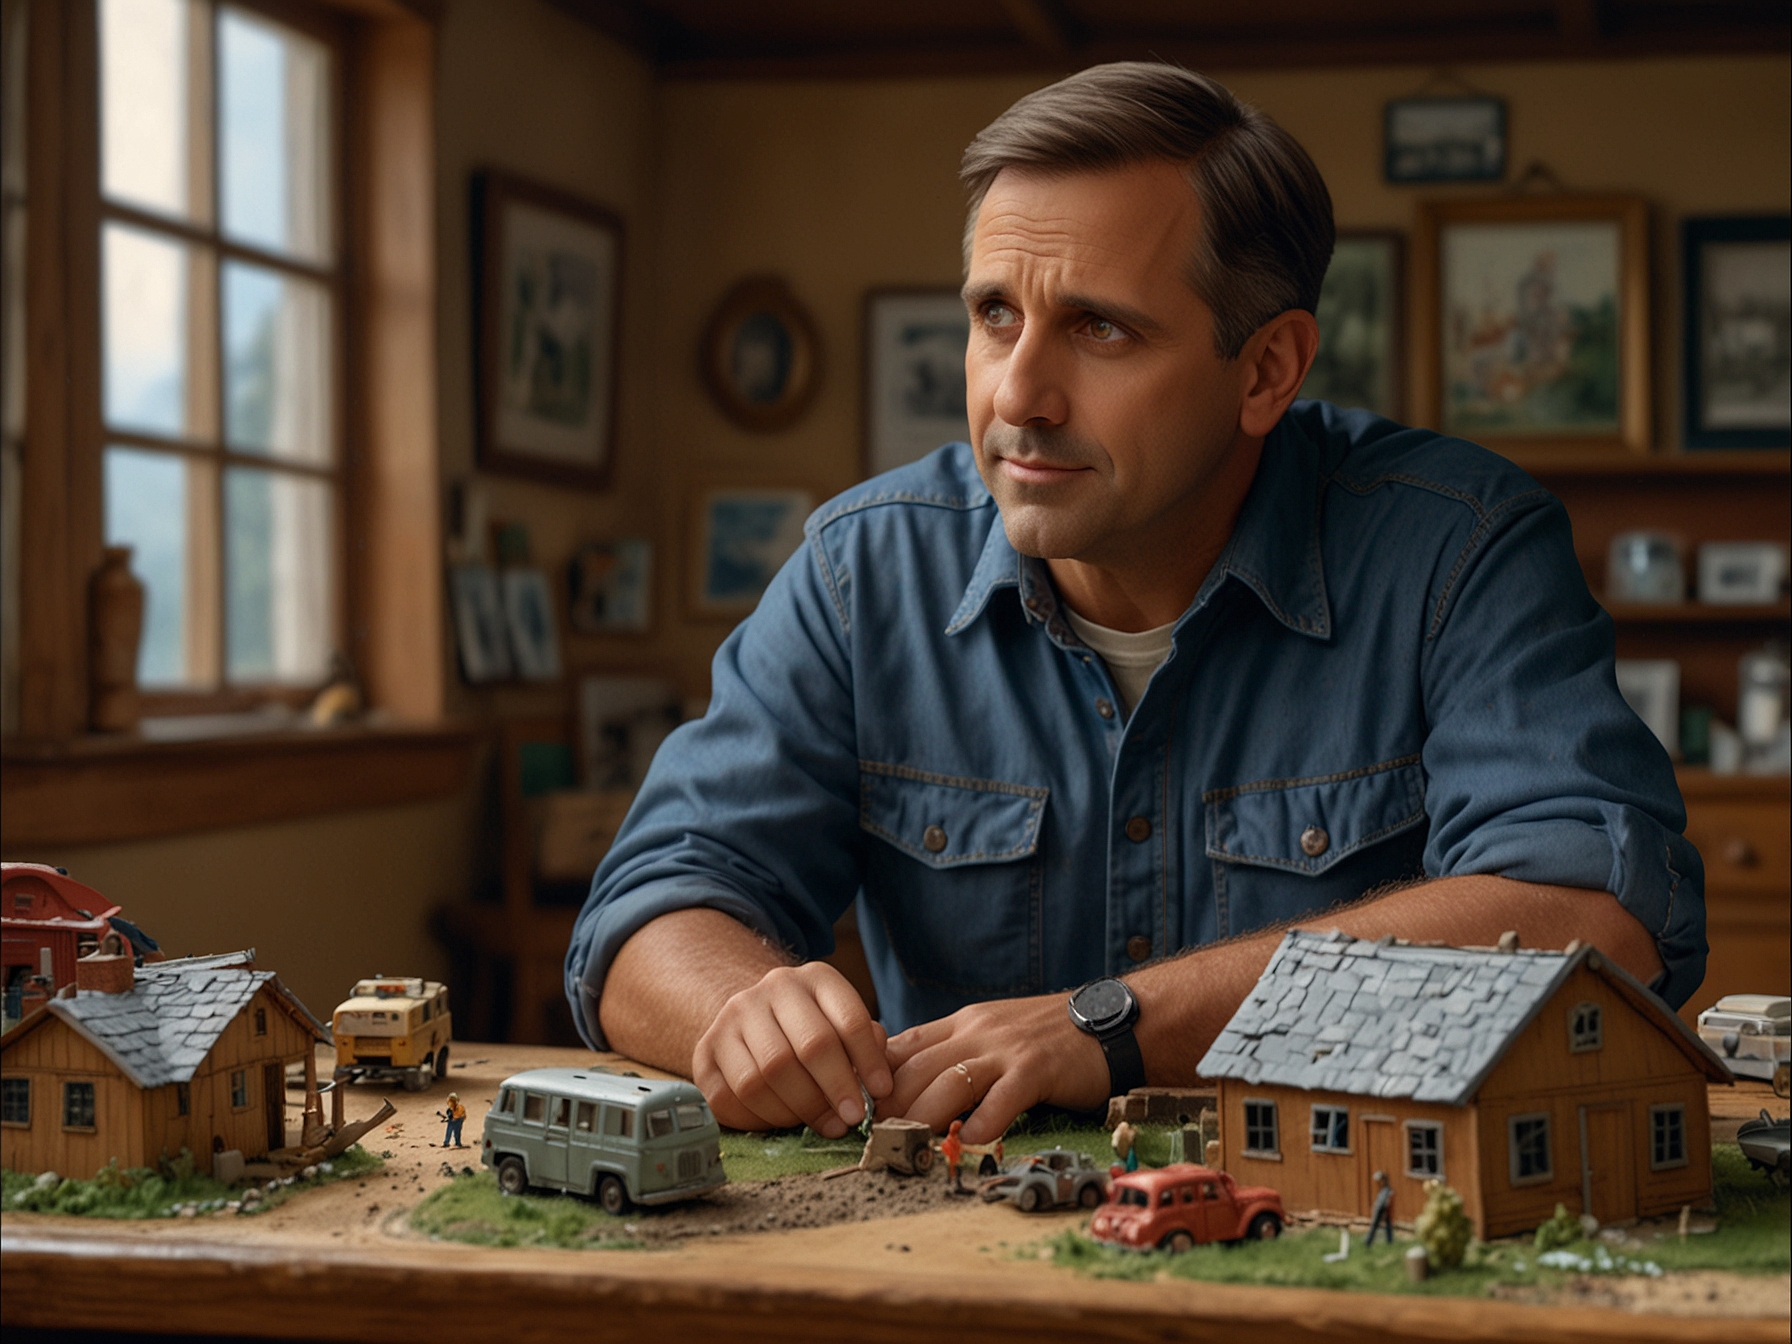 A scene from Welcome to Marwen showing Steve Carell as Mark Hogancamp meticulously working on his detailed model village, symbolizing his journey of recovery.